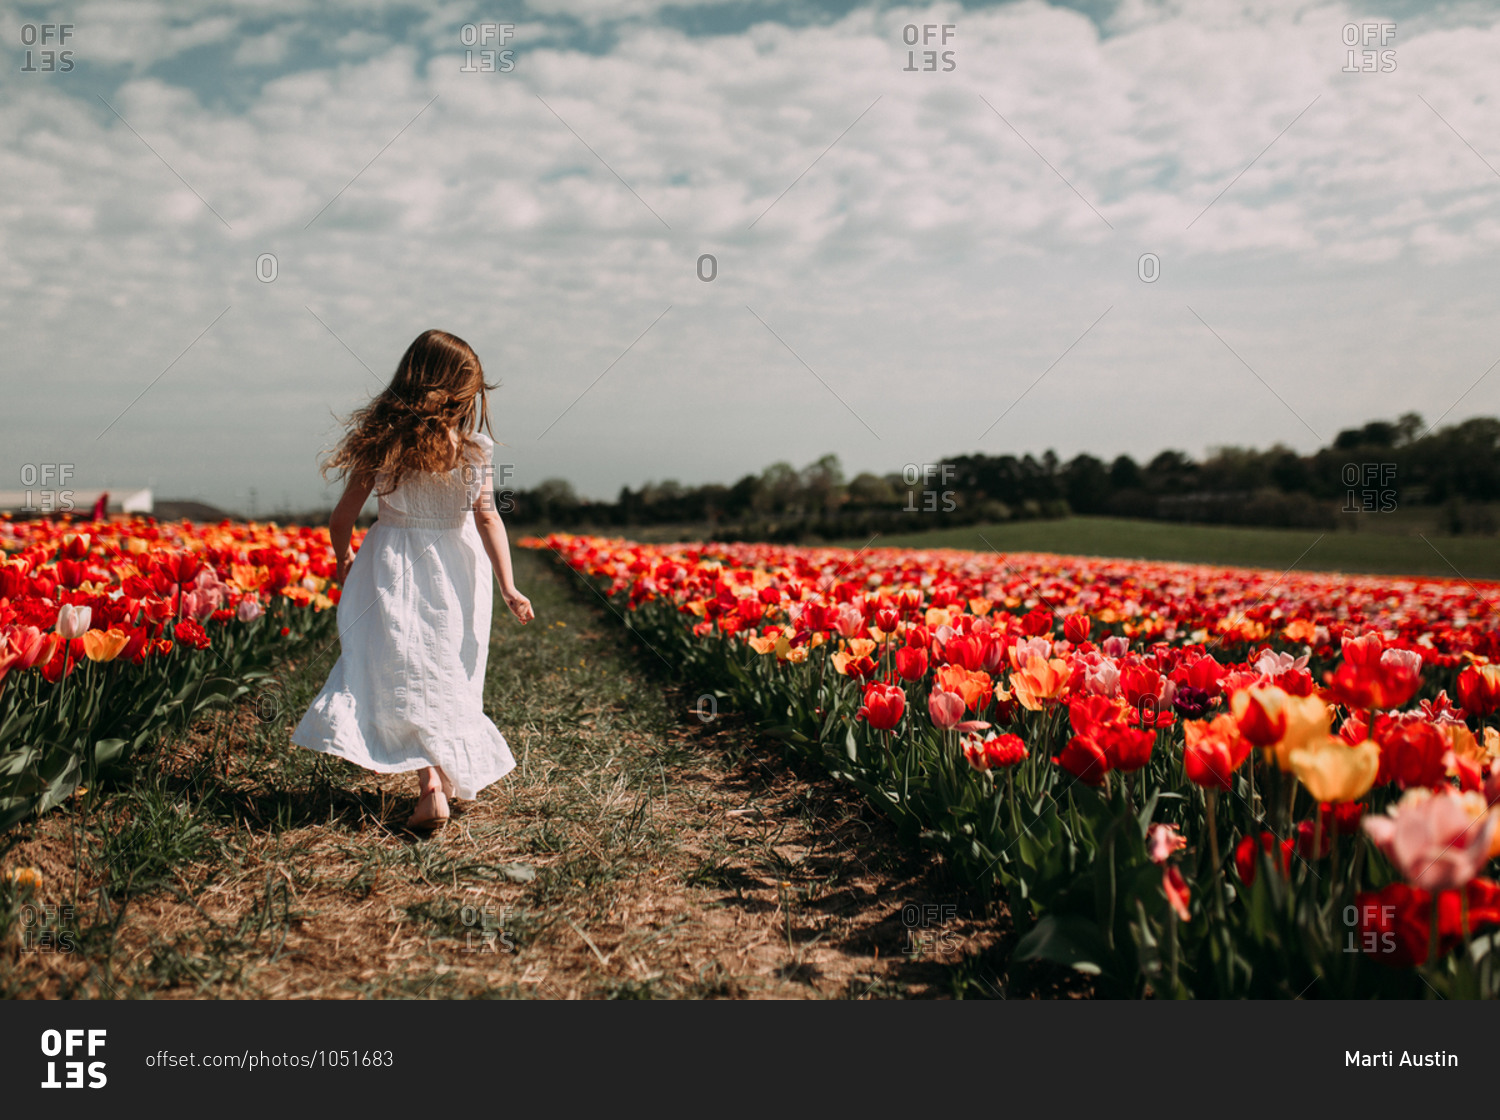 Girl wearing a long white dress walking in a field filled with colorful tulips